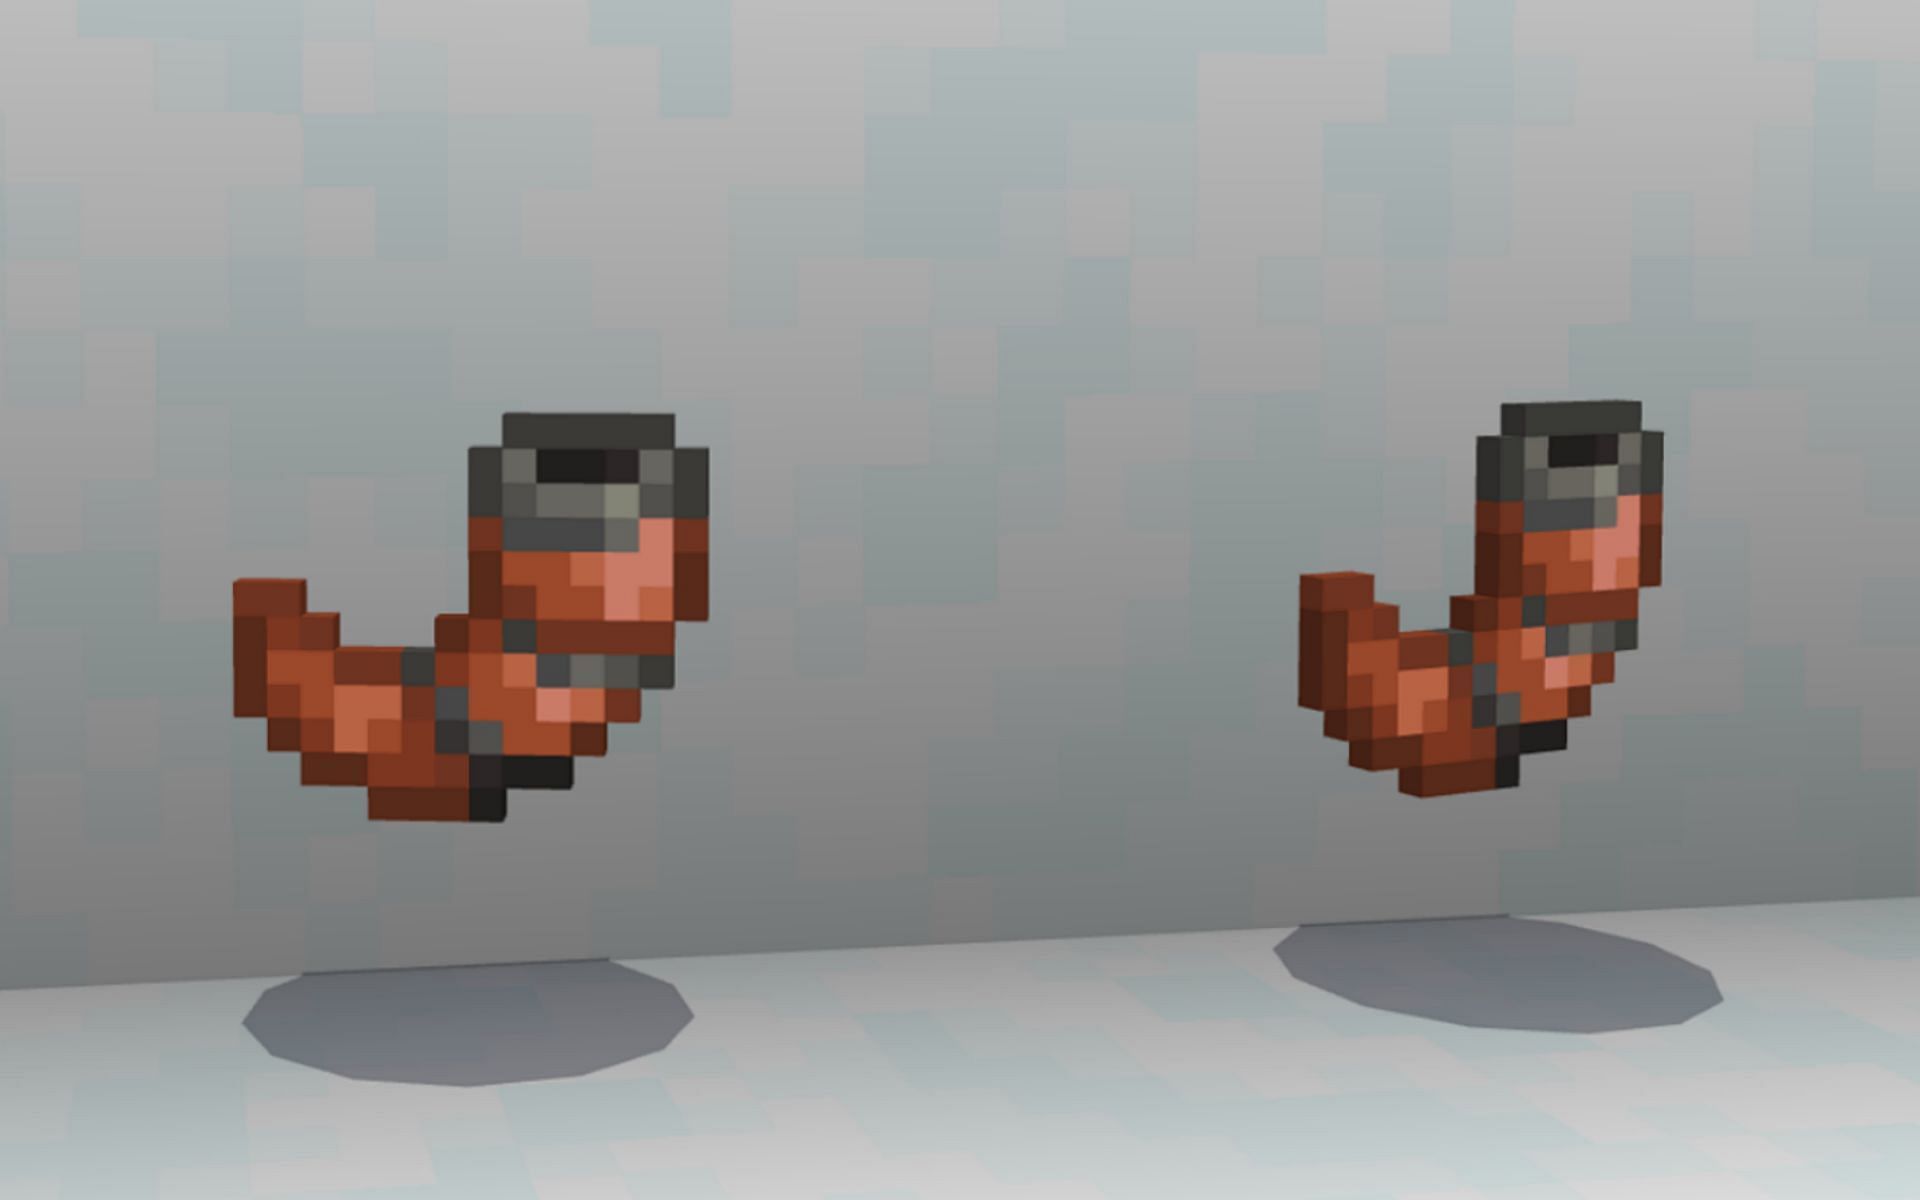 Copper Horns were removed from Minecraft as developers were not satisfied with the item (Image via Mojang)